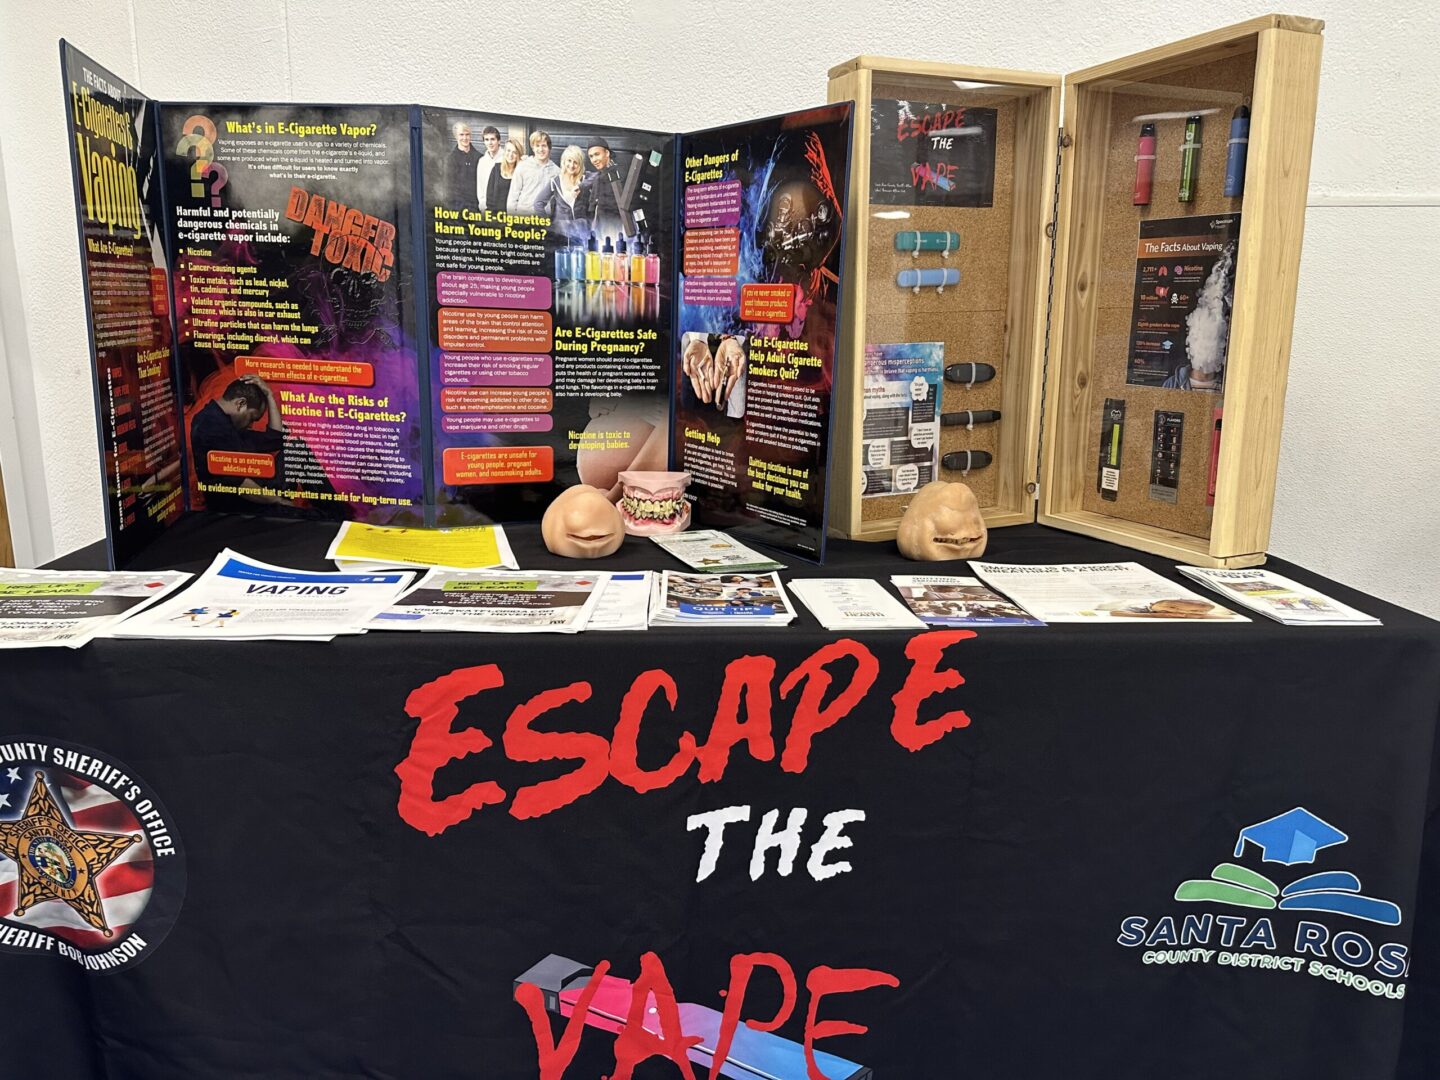 Informational booth titled "escape the vape" by santa rosa county sheriff's department, displaying educational materials and anti-vaping posters.